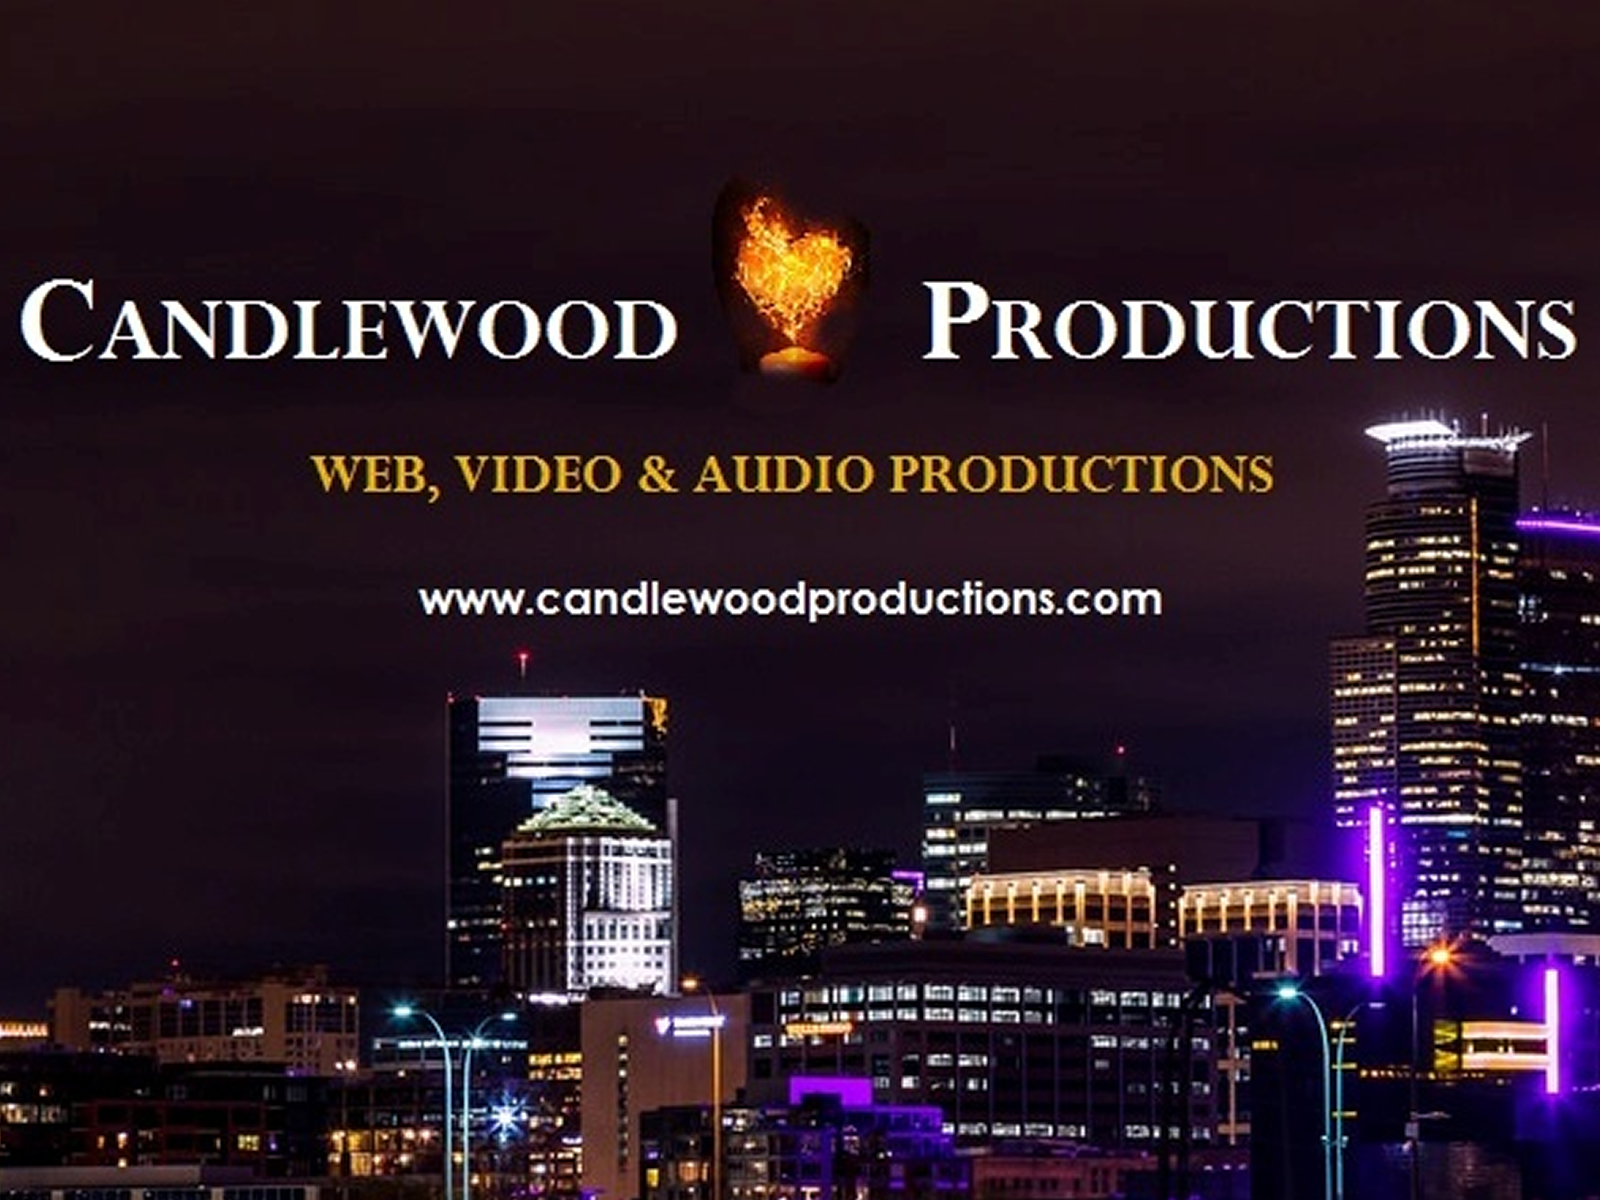 Candlewood Productions